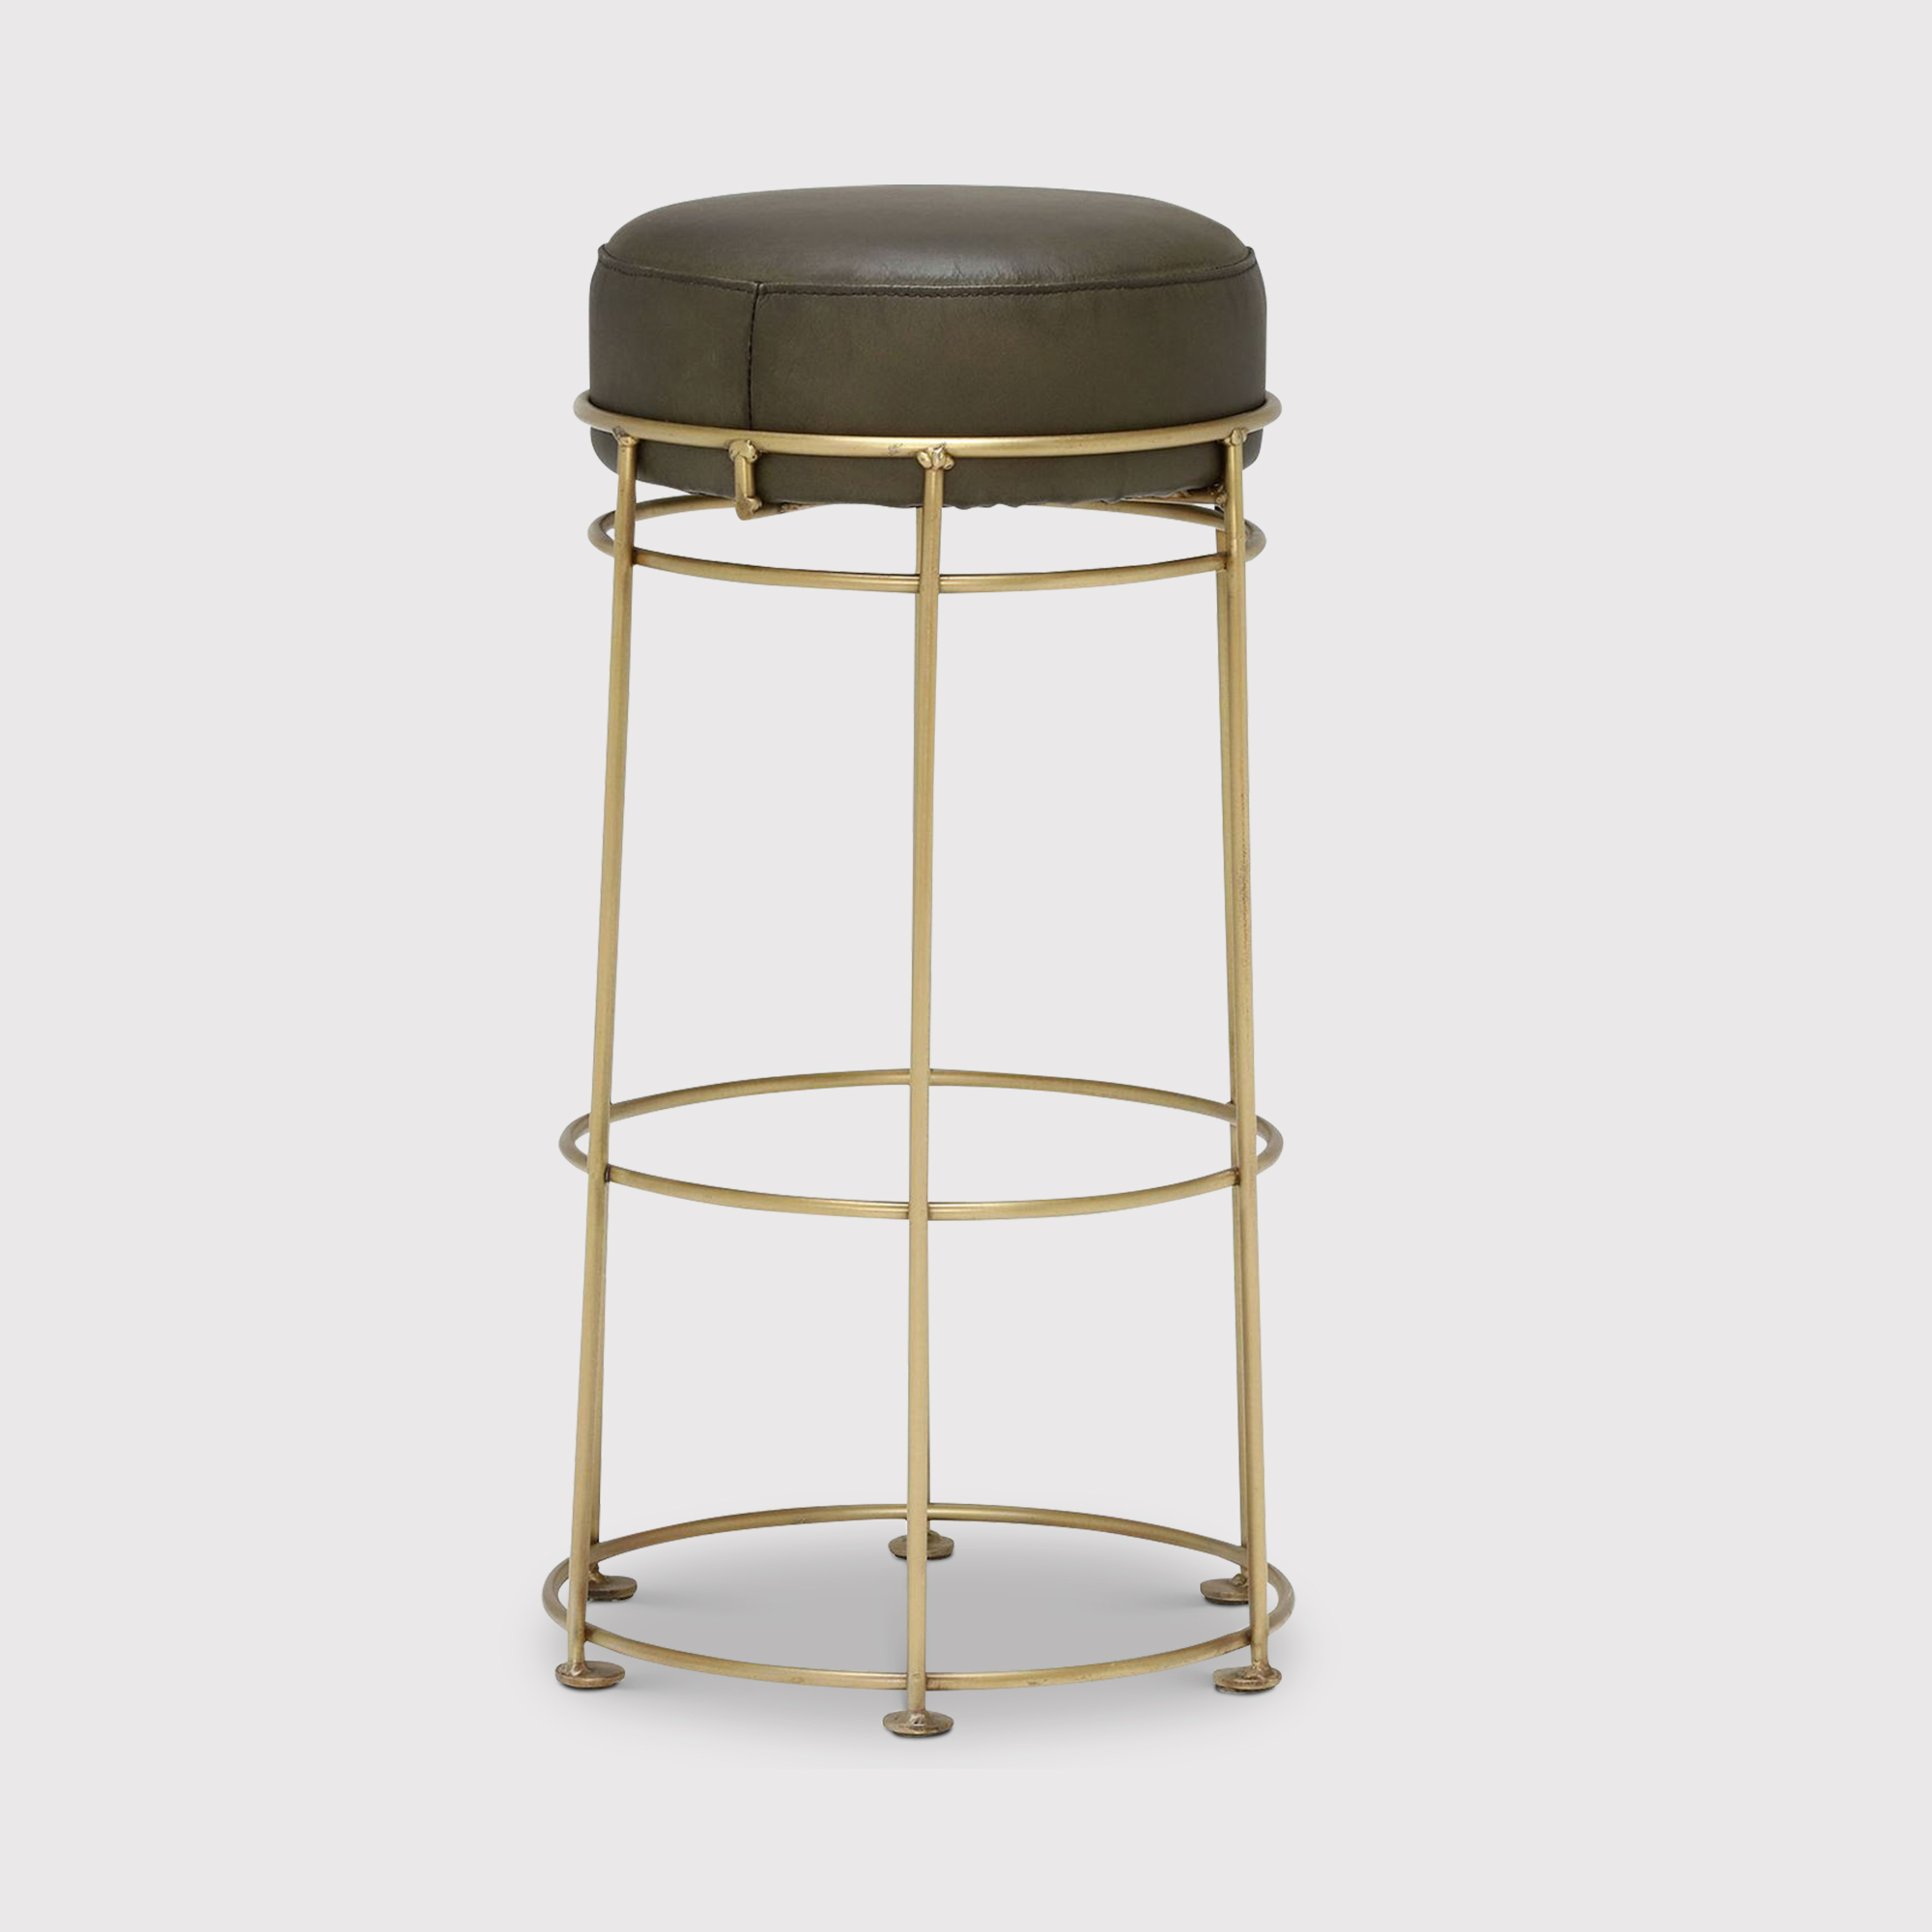 Pure Furniture Nola Barstool With Brass Antique Frame, Green | Barker & Stonehouse